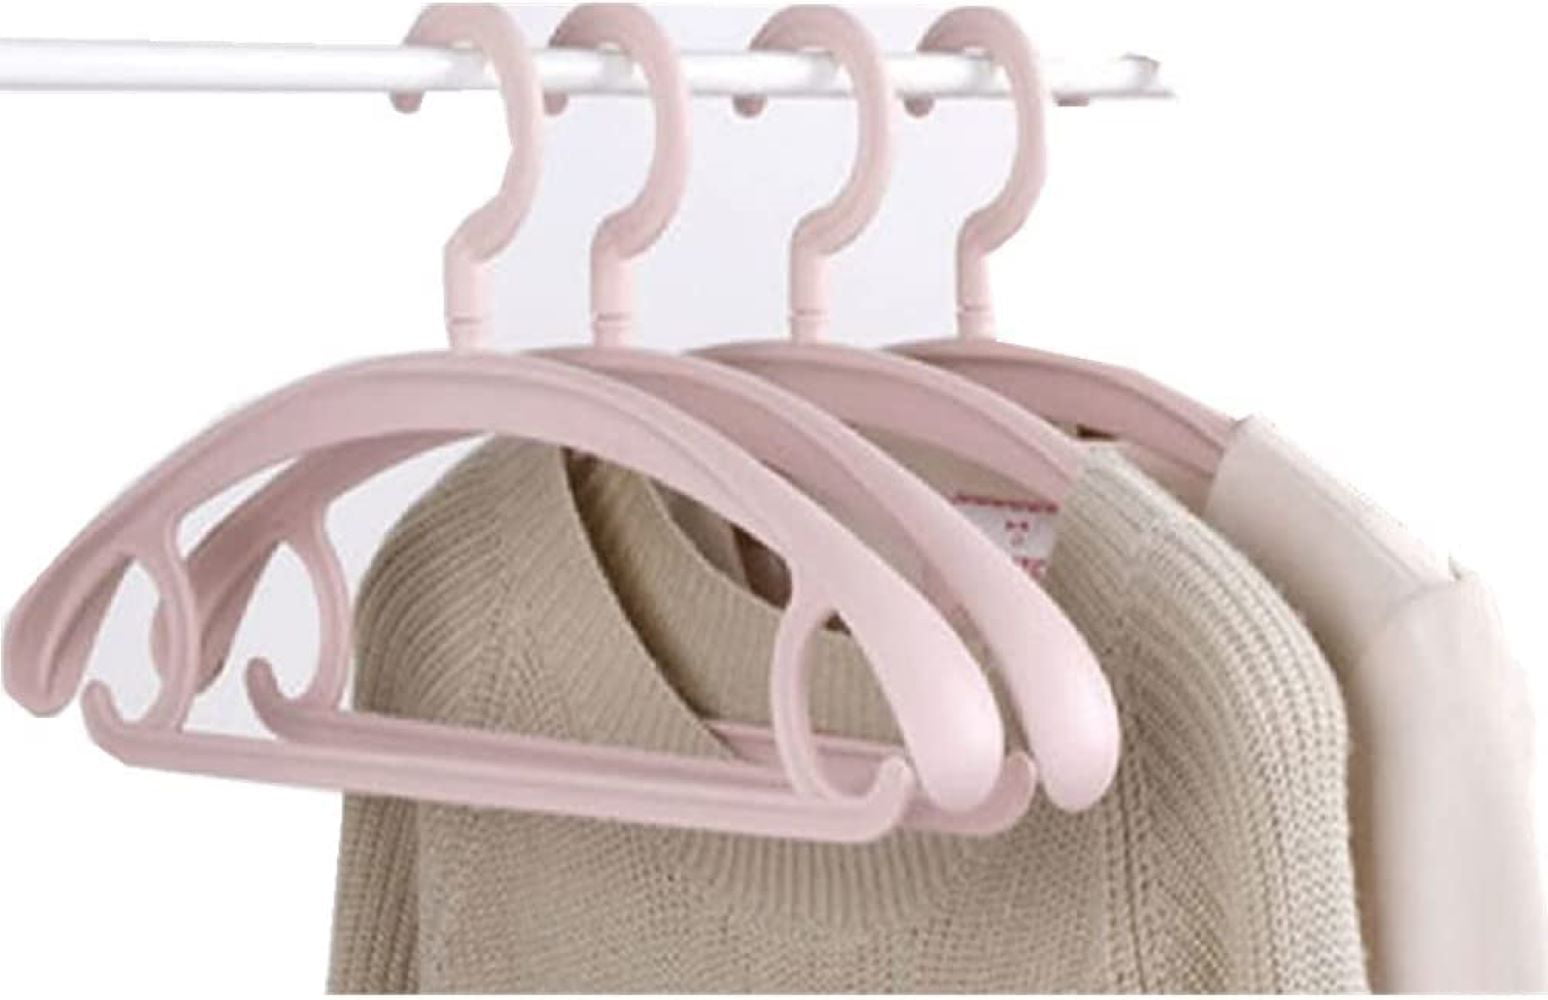 1 Neaties Heavy Duty Plastic Hangers Made in USA with Accessory Hook, Heavy  Duty Plastic Non Slip clothes Hangers for Suits, coats